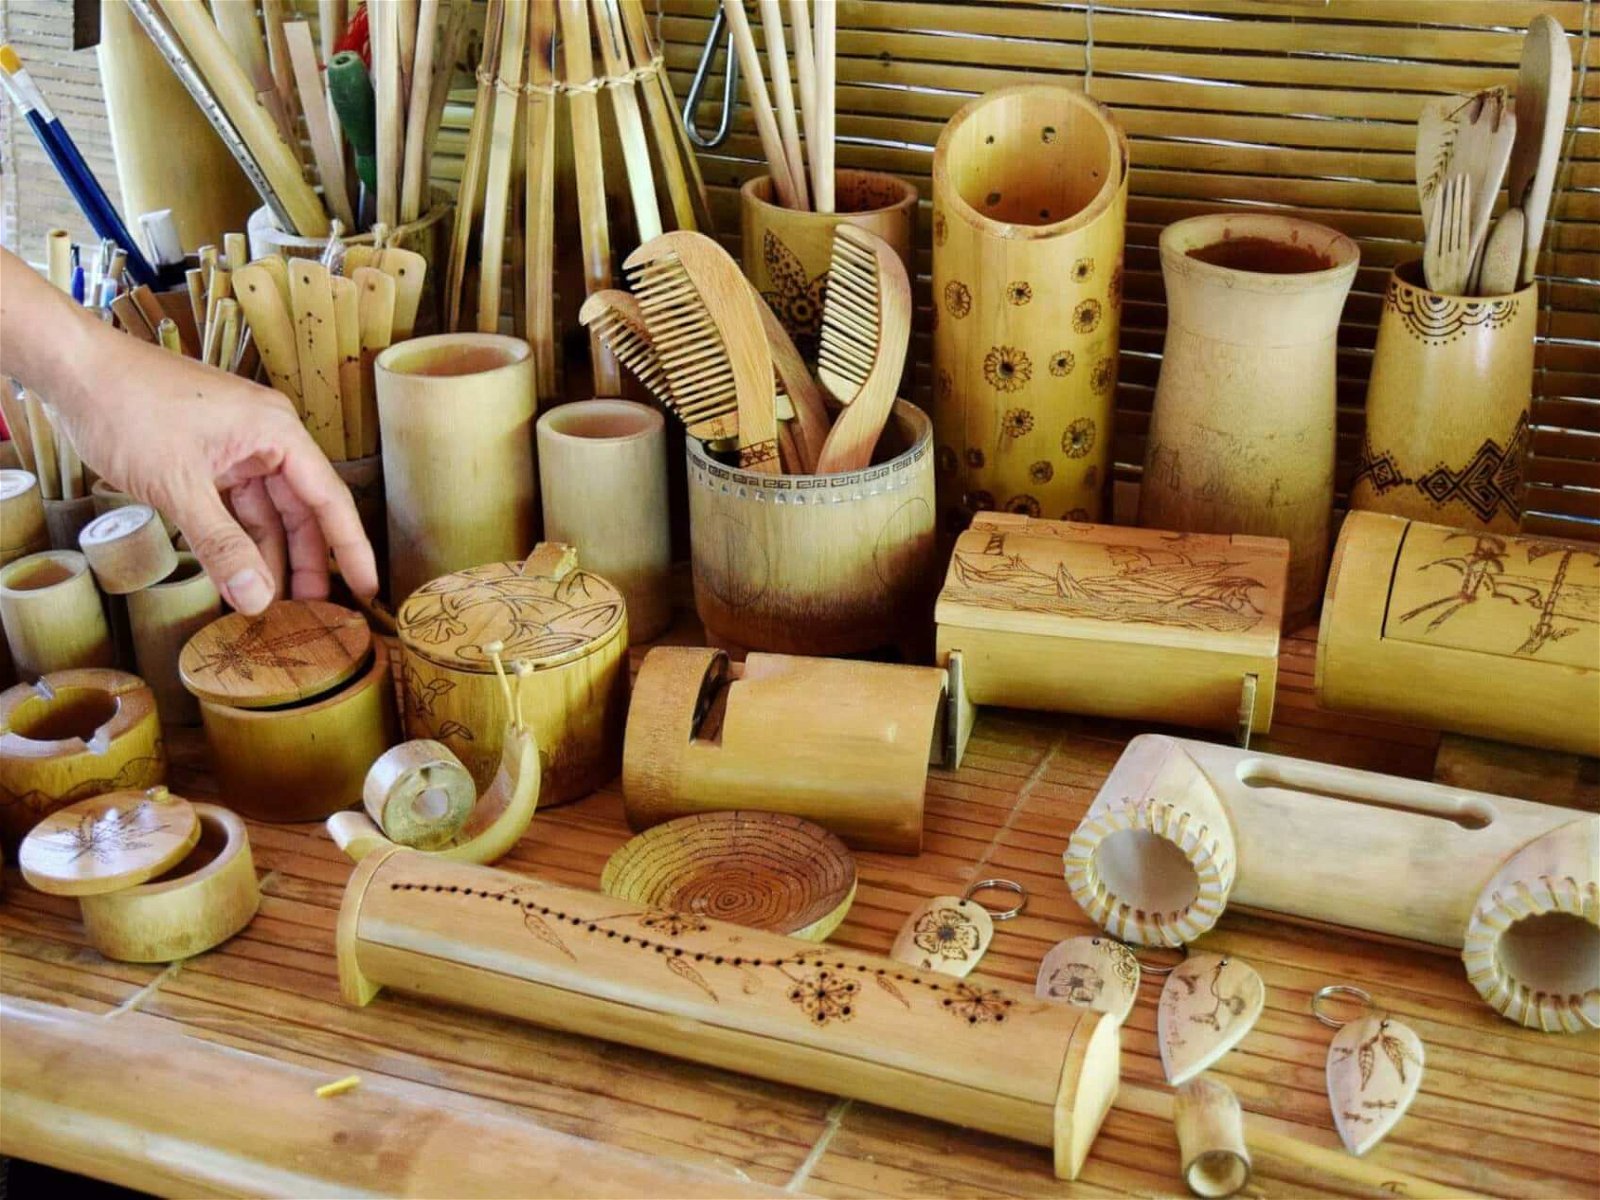 local handicraft in hoi an - Things To Do In Hoi An